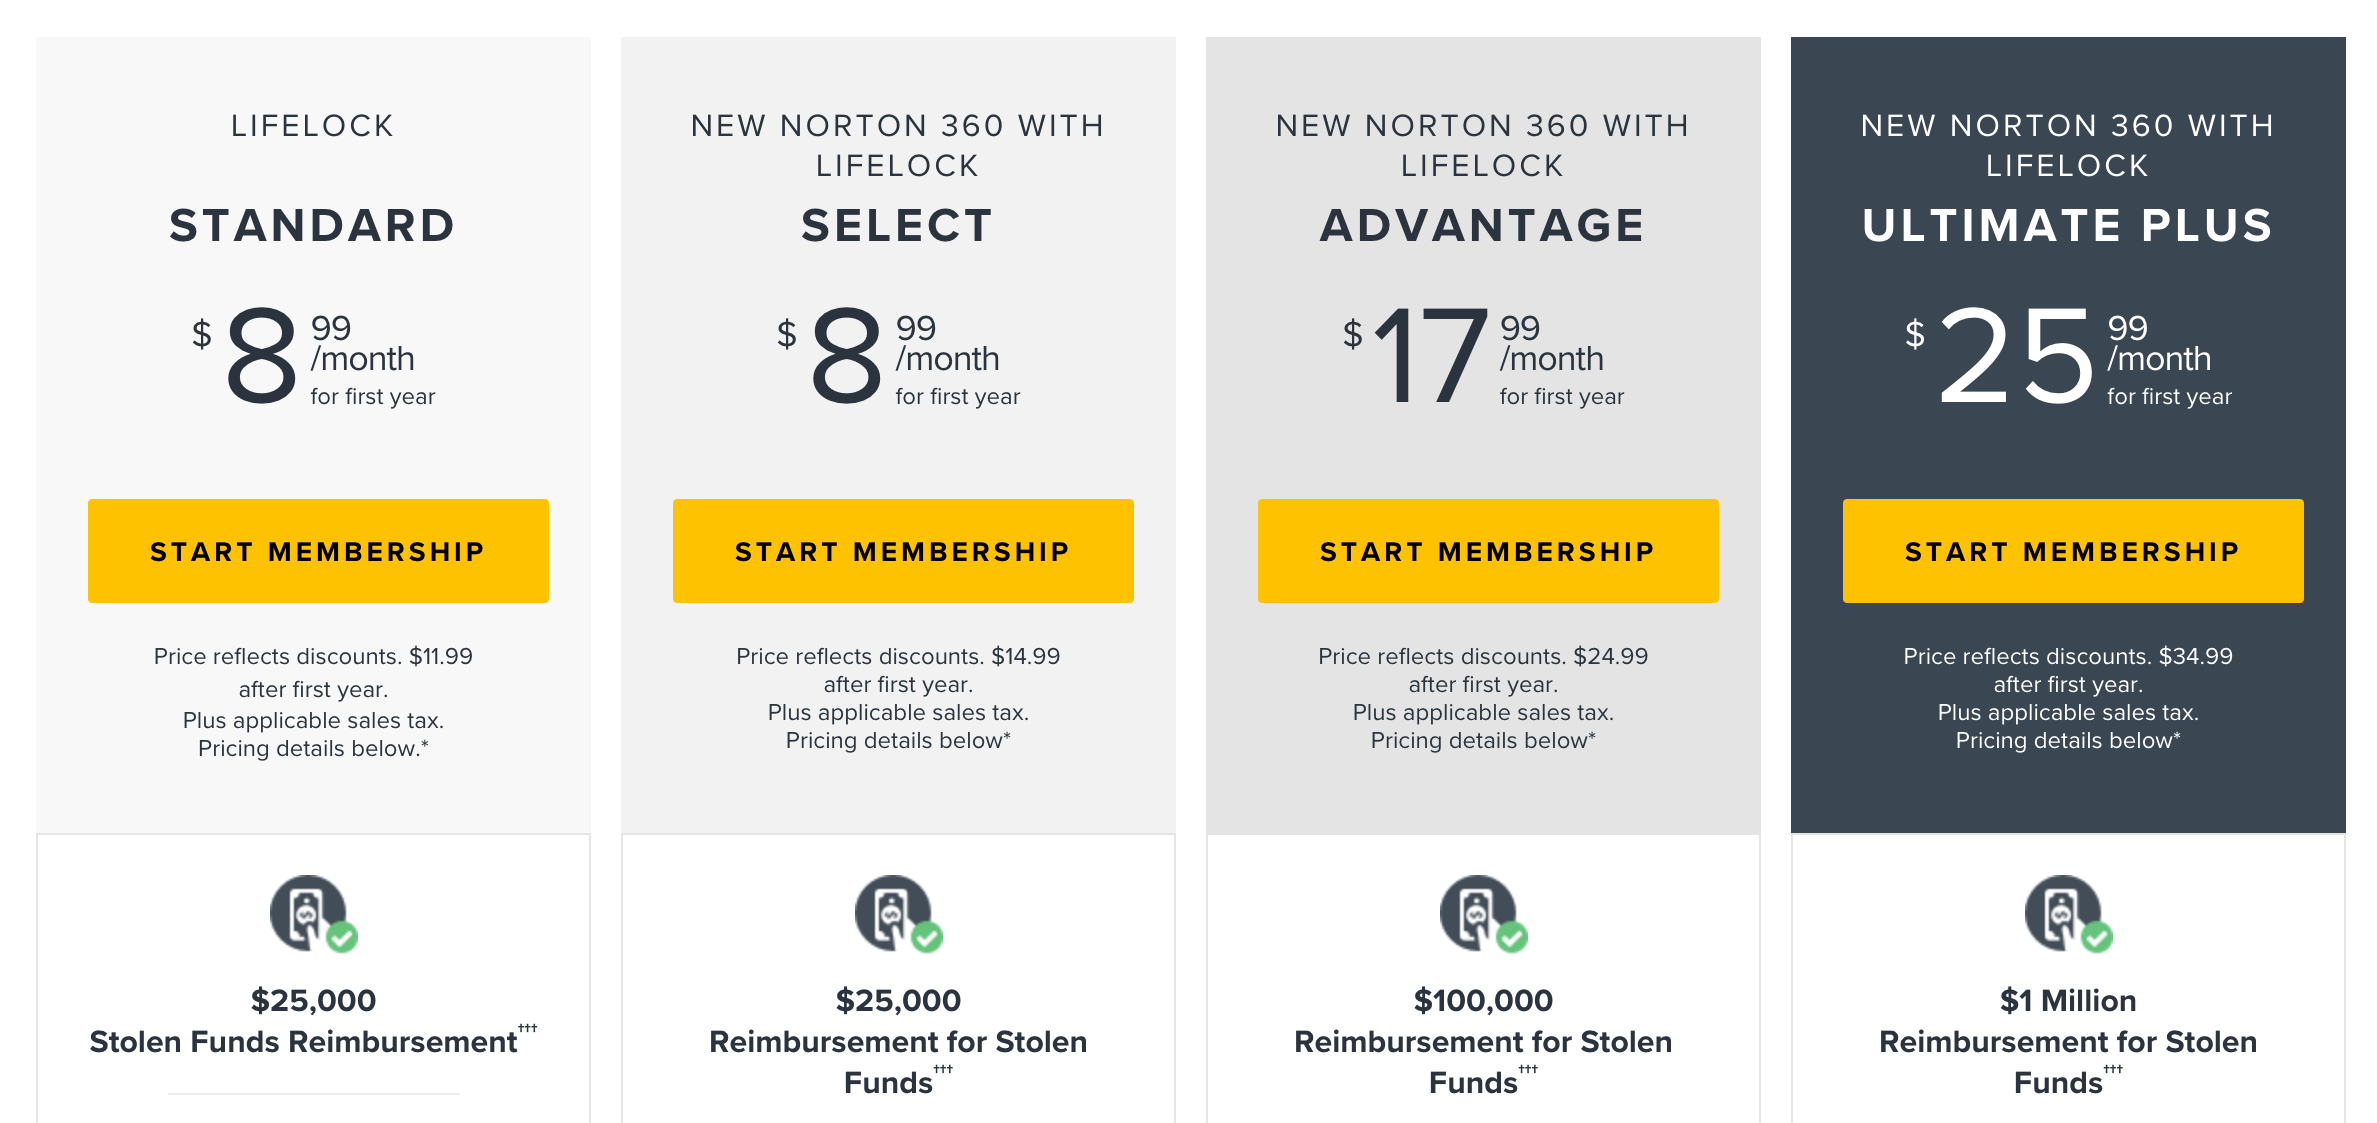 cost of norton 360 with lifelock